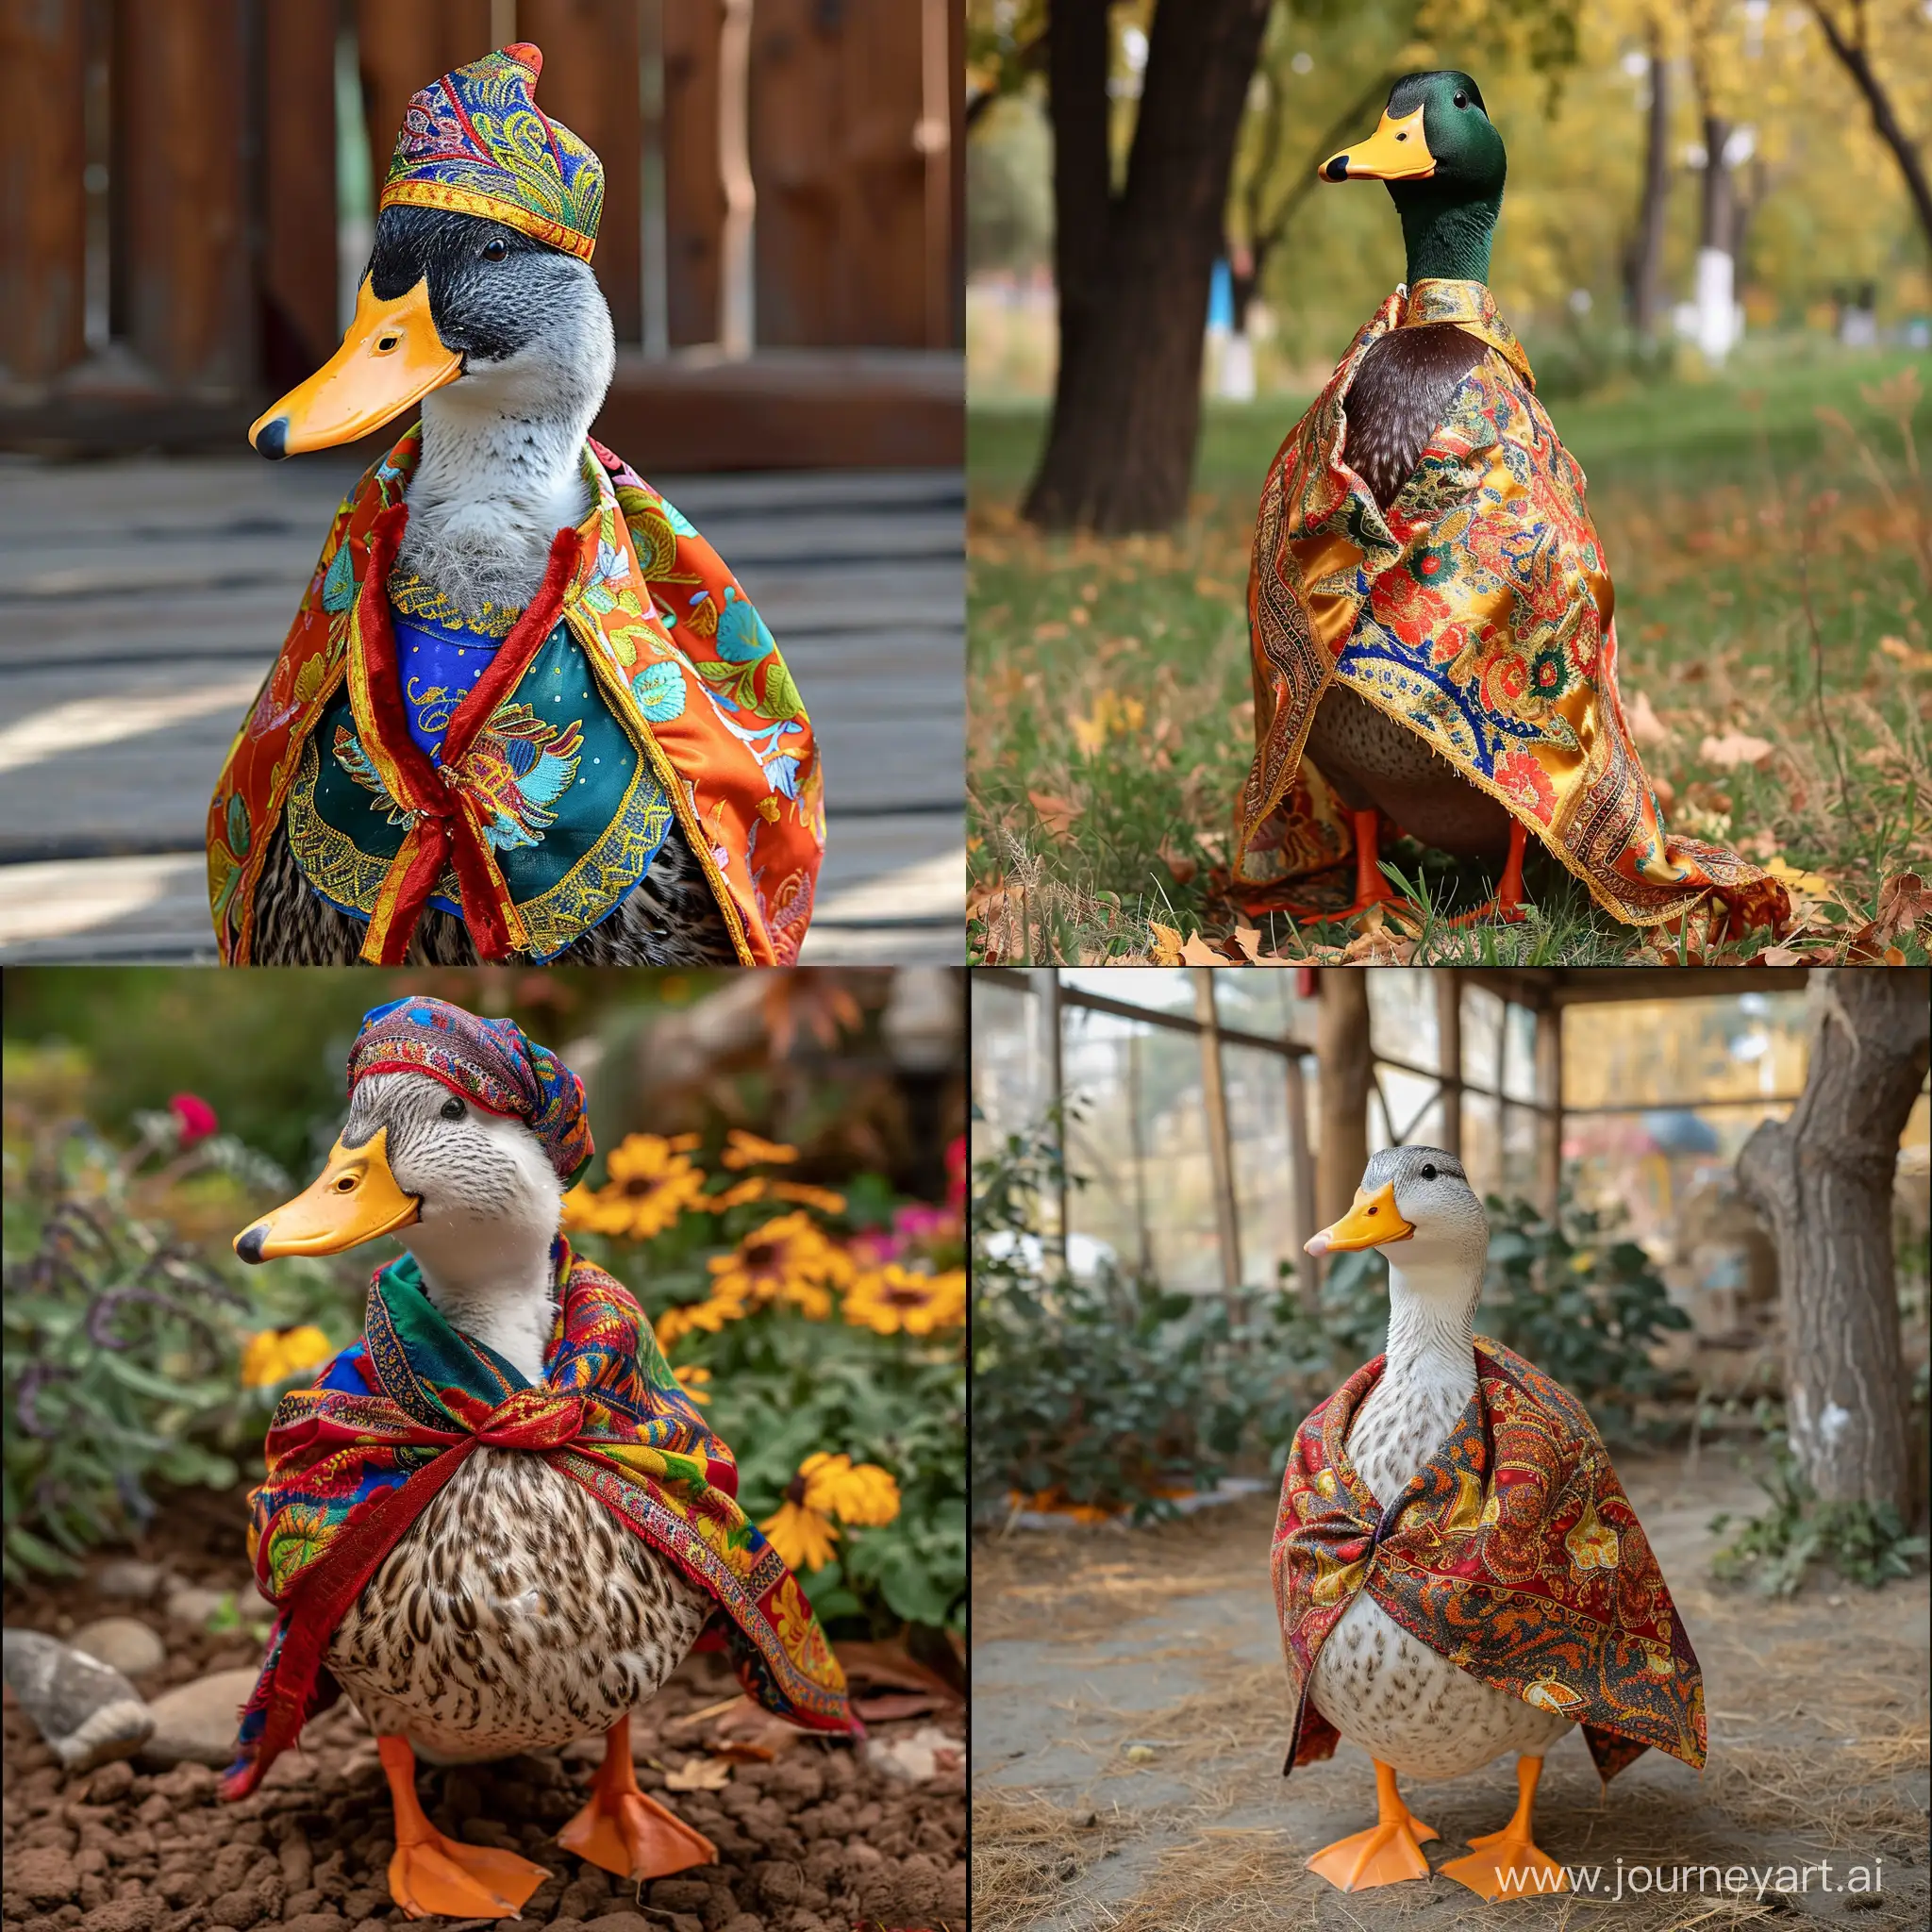 Dress the duck from the picture with Kazakh national cloth
